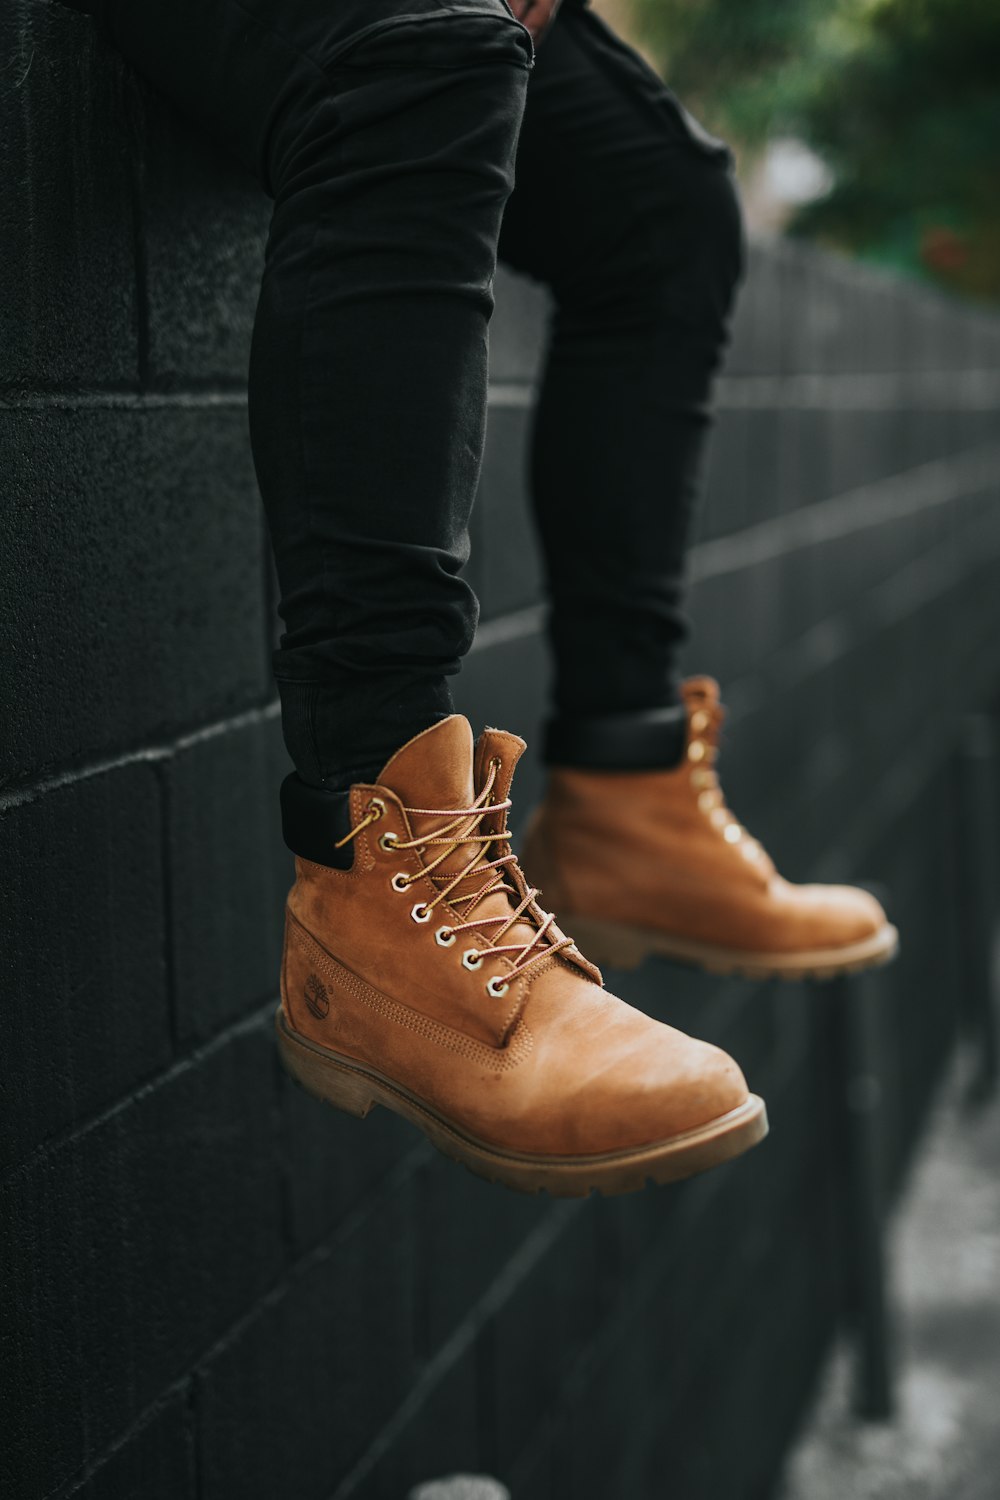 person wearing pair of brown Timberland leather work boots